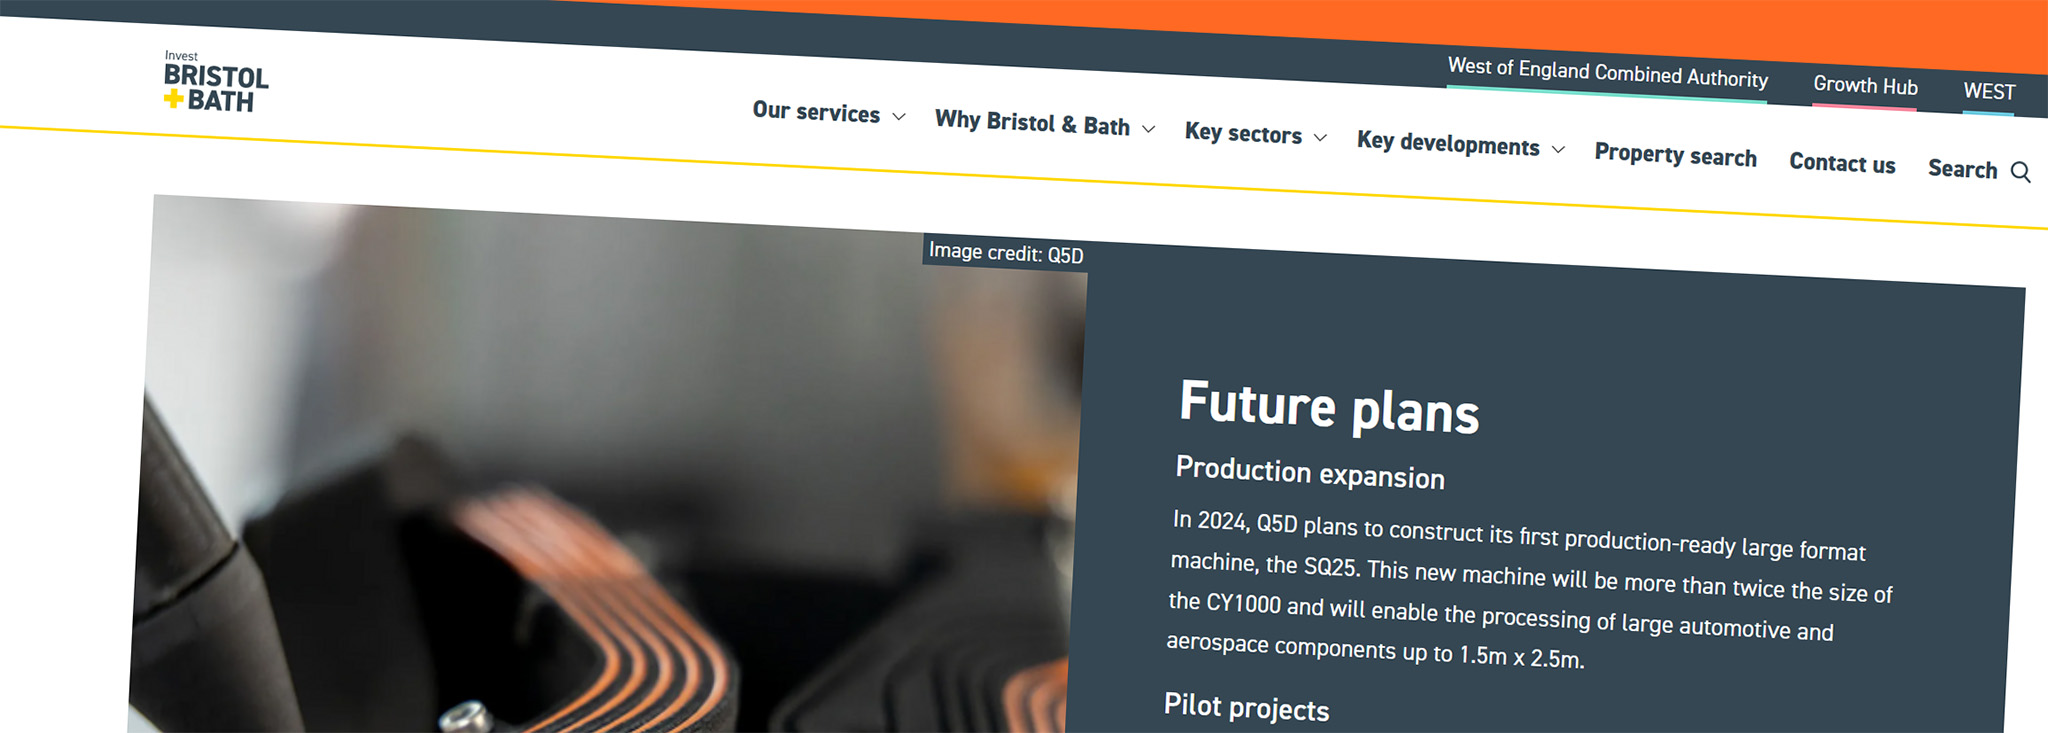 Screengrab of invest bath and bristol case study on Q5D